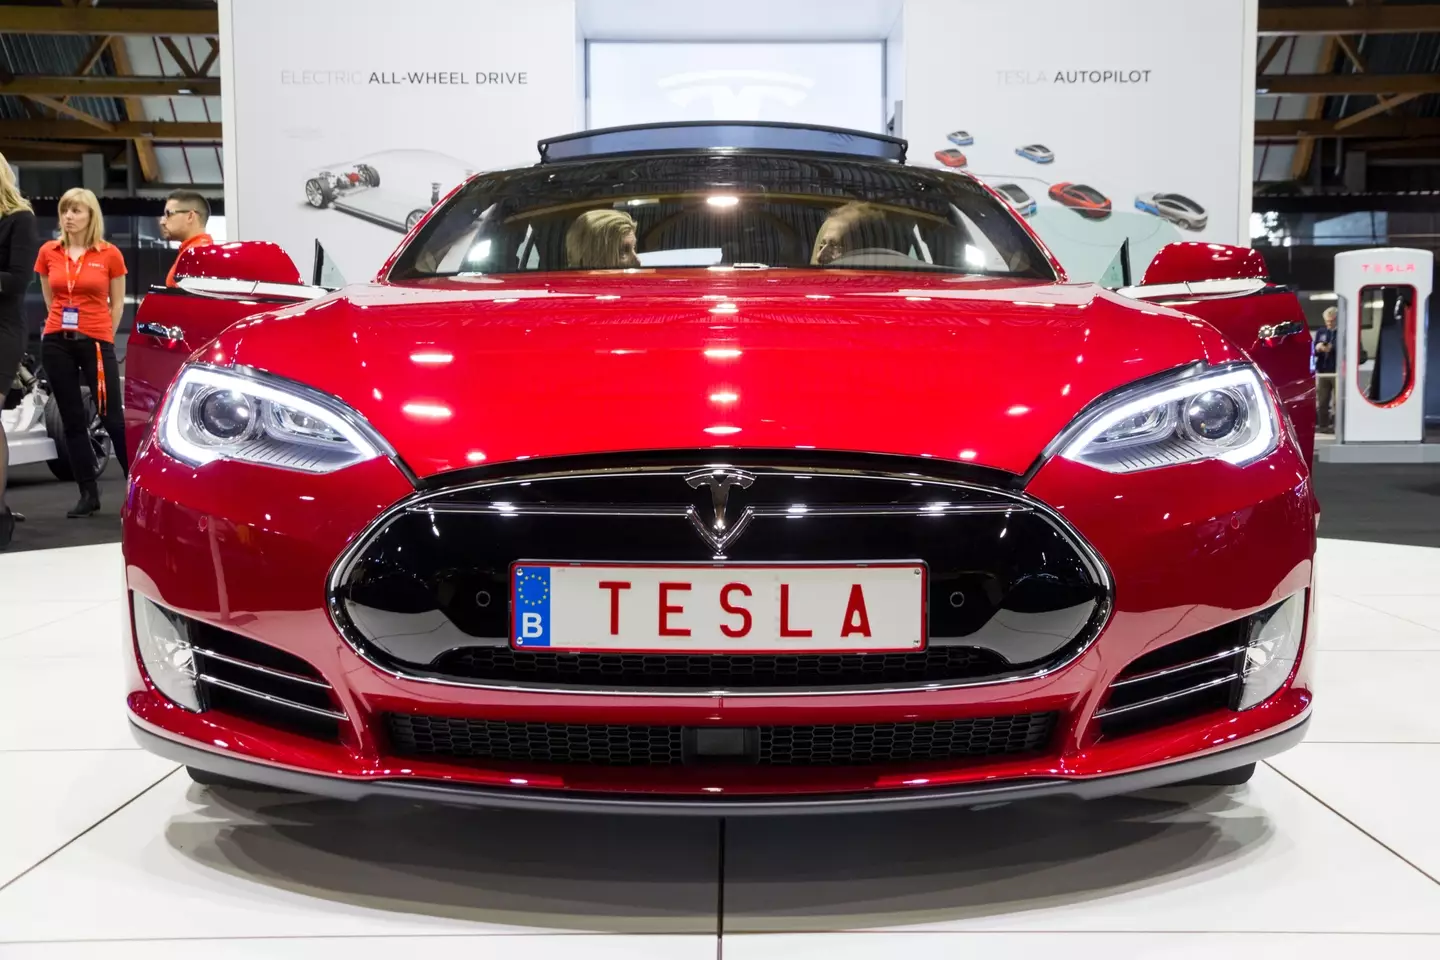 Tesla has warned drivers that full self-driving is still in beta testing and that ‘must be used with additional caution’.